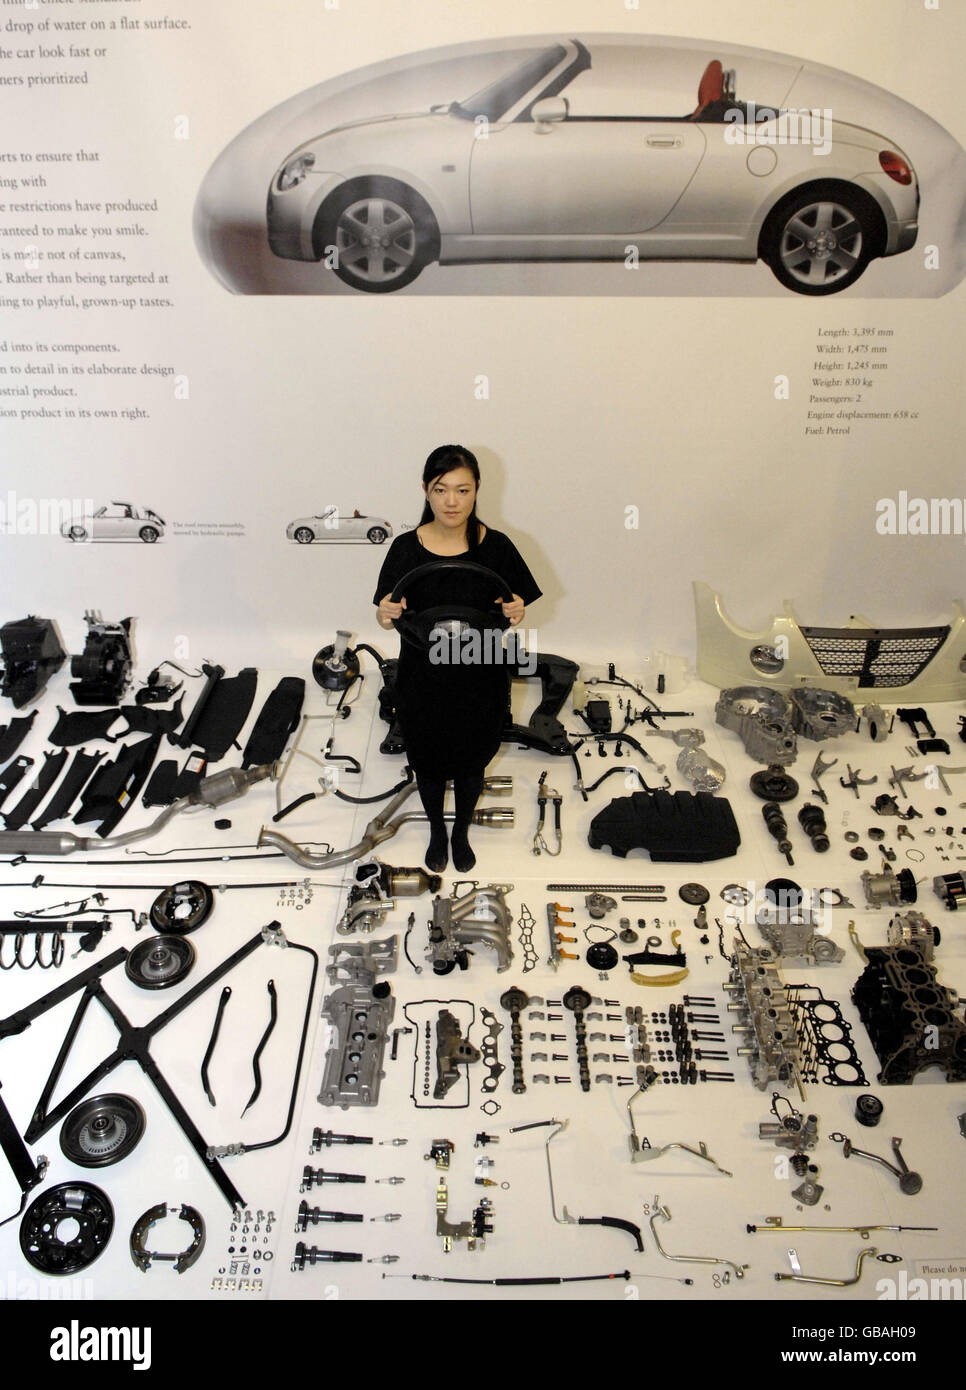 A woman stands among car parts of a Daihatsu Copen in the Science Museum in London. It is part of a new exhibition called 'Japan Car' which aims to showcase the future of car transport. Stock Photo